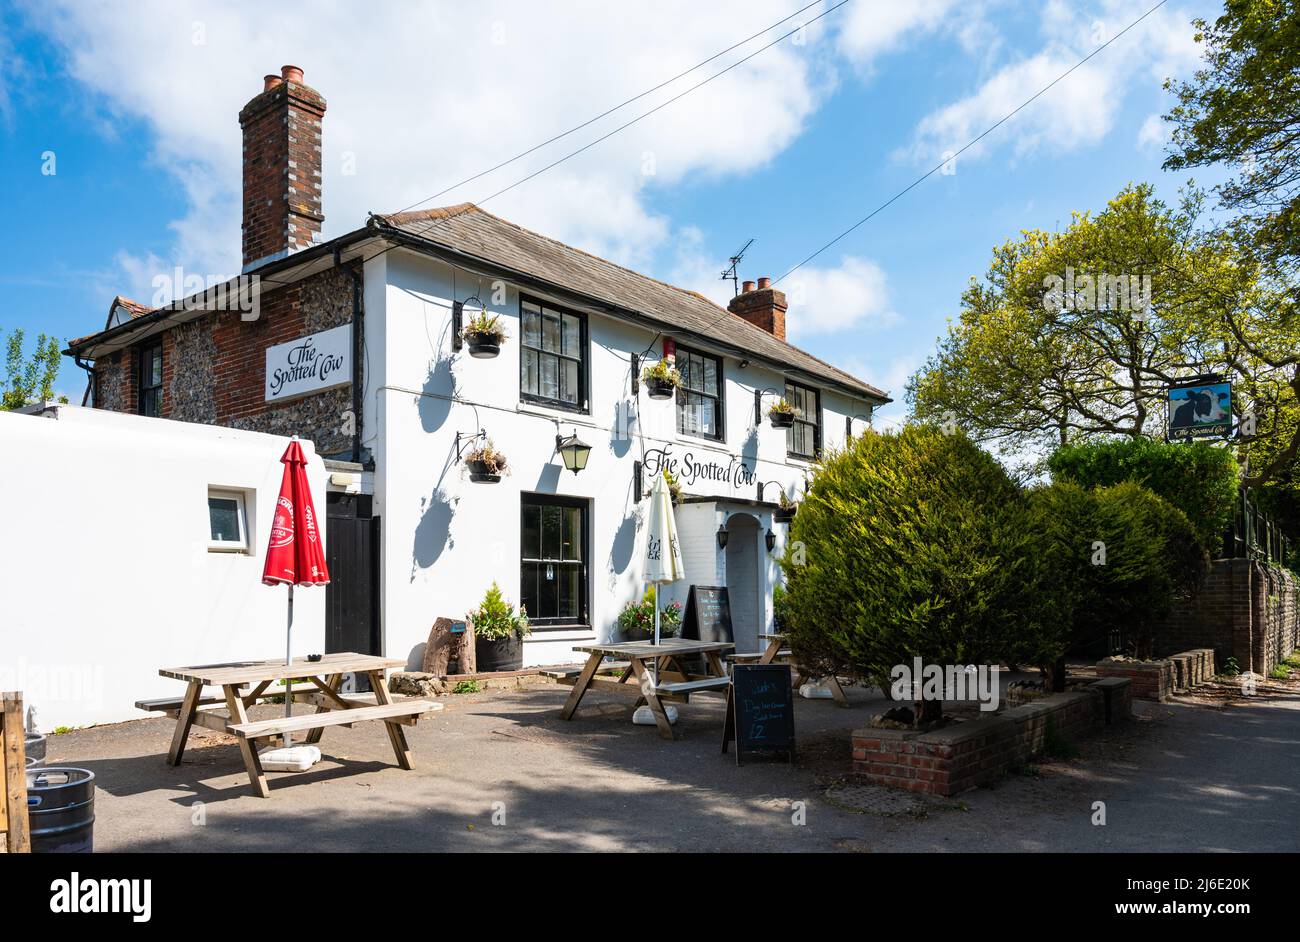 The Spotted Cow Traditional Village Pub in Angmeling, West Sussex, England, Großbritannien. Stockfoto